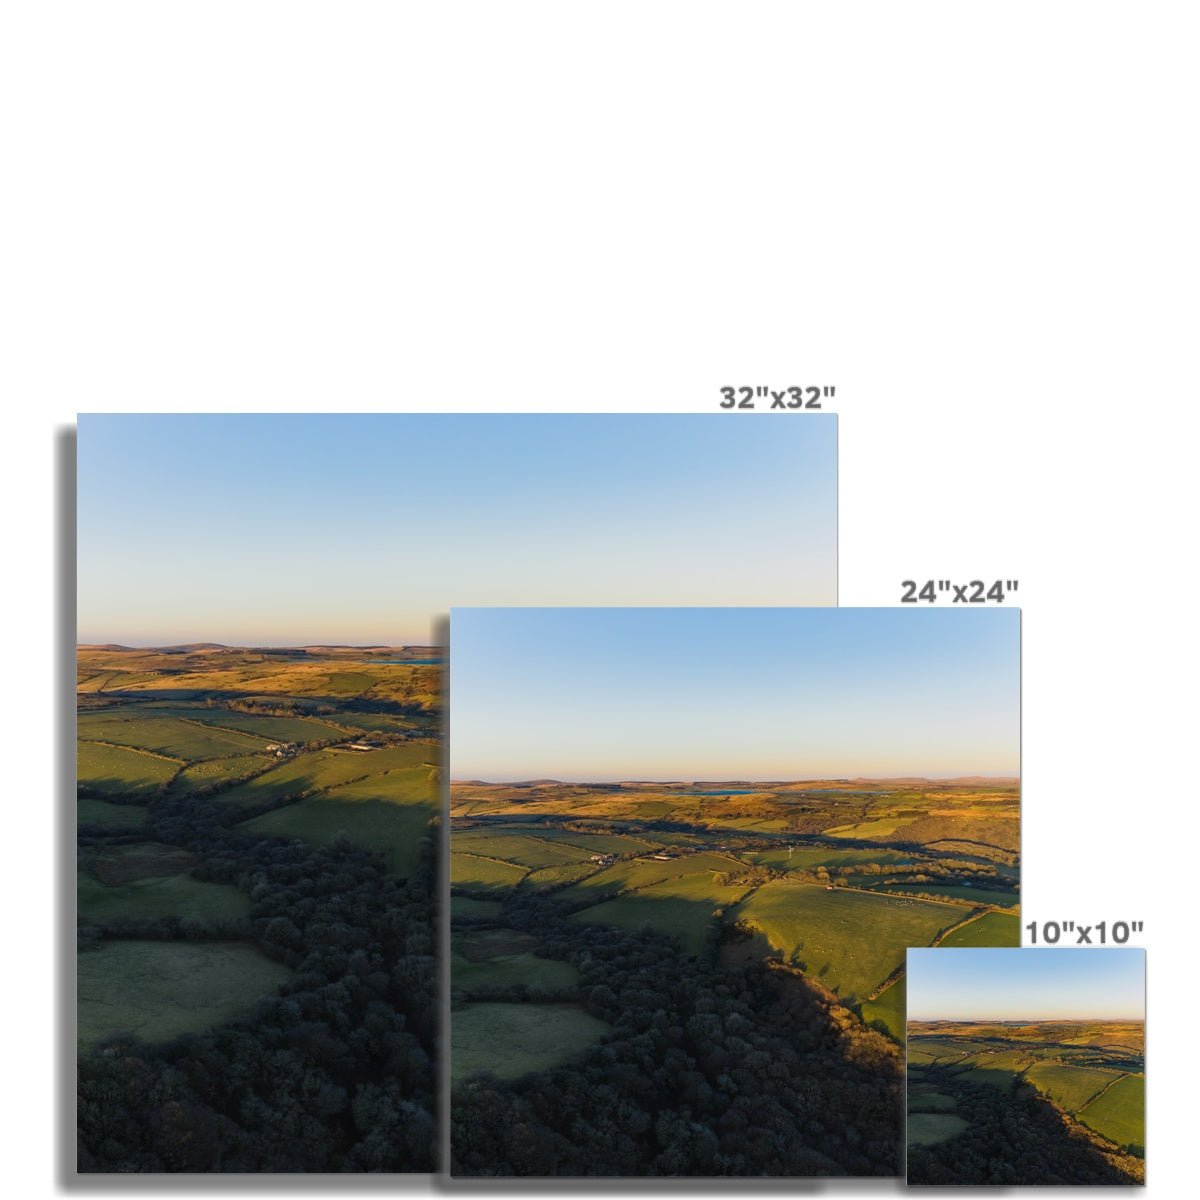 bodmin moor picture sizes